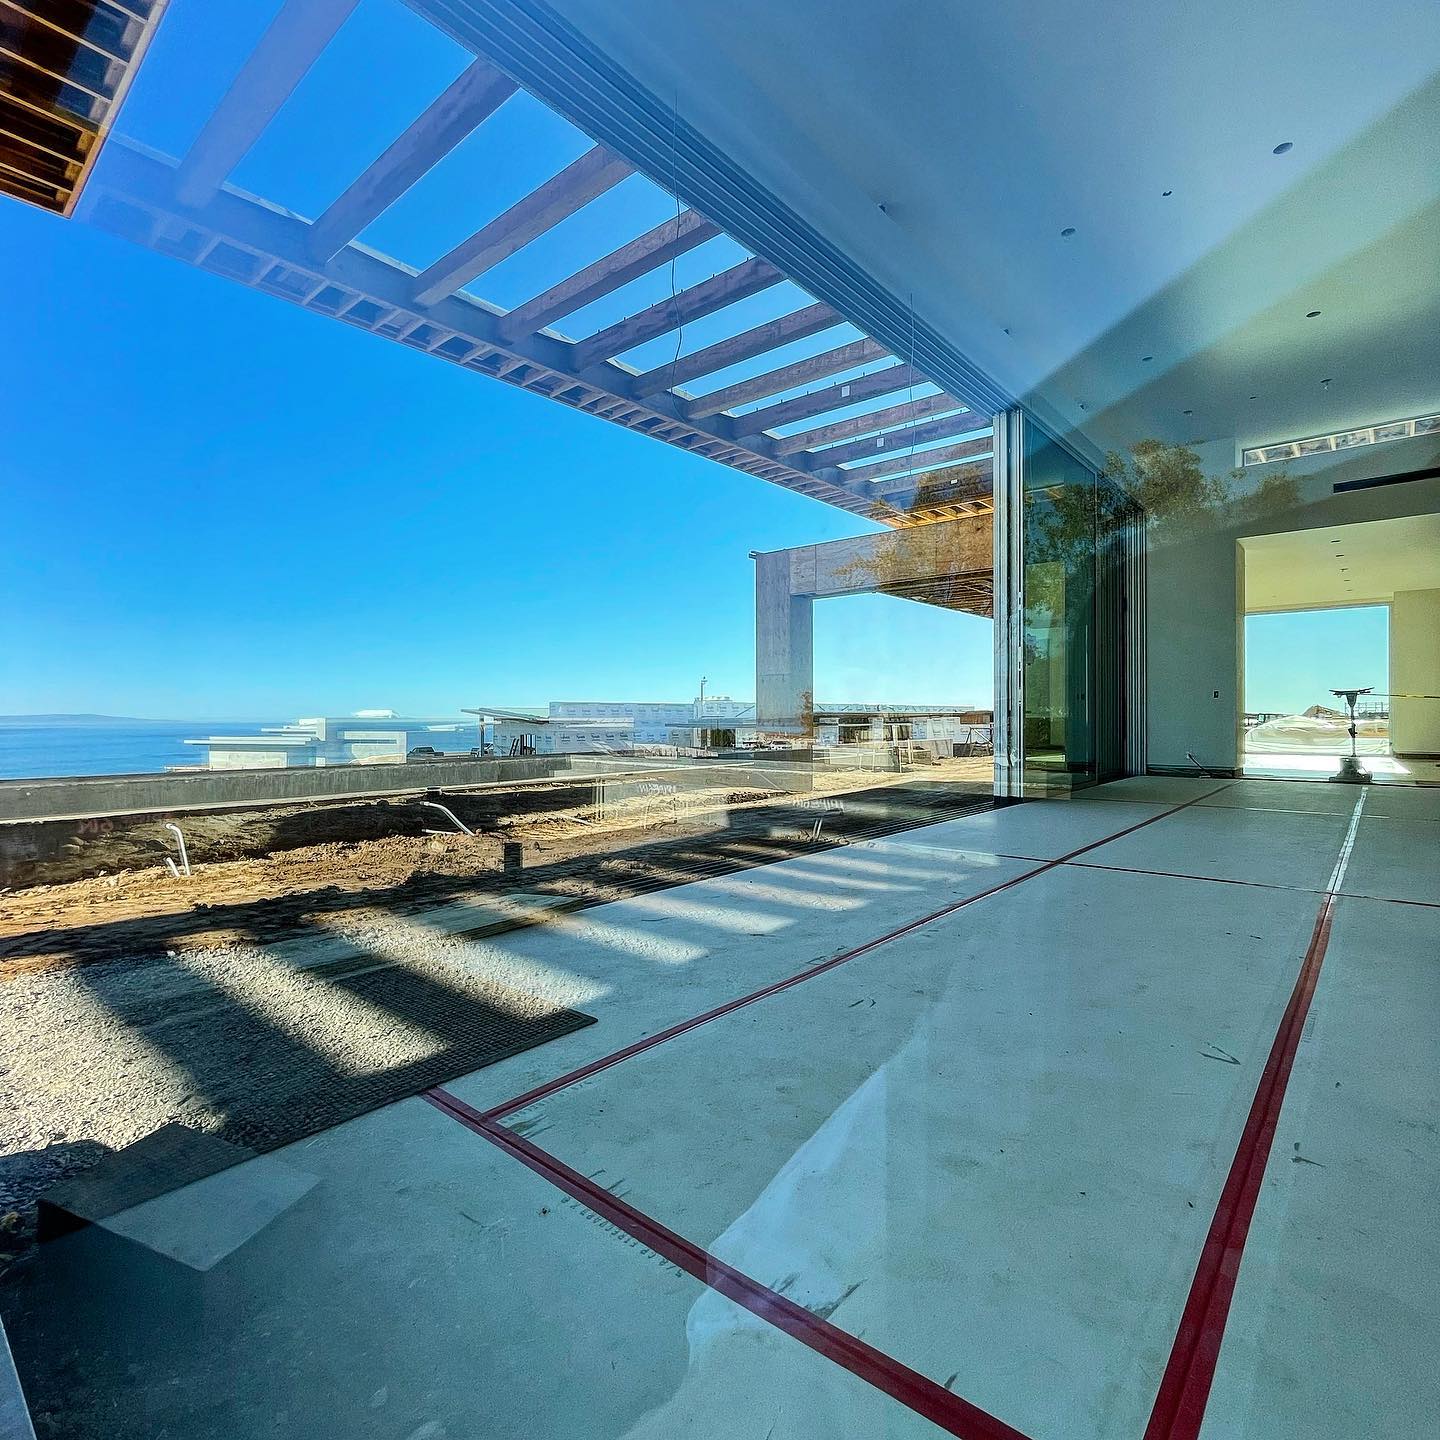 There is definitely something going on up here, come see. #scottgillendesign #thecase A complete private community consisting of five separate home Estates. The Flat is over 10,000 ft.², mid century modern, epic….